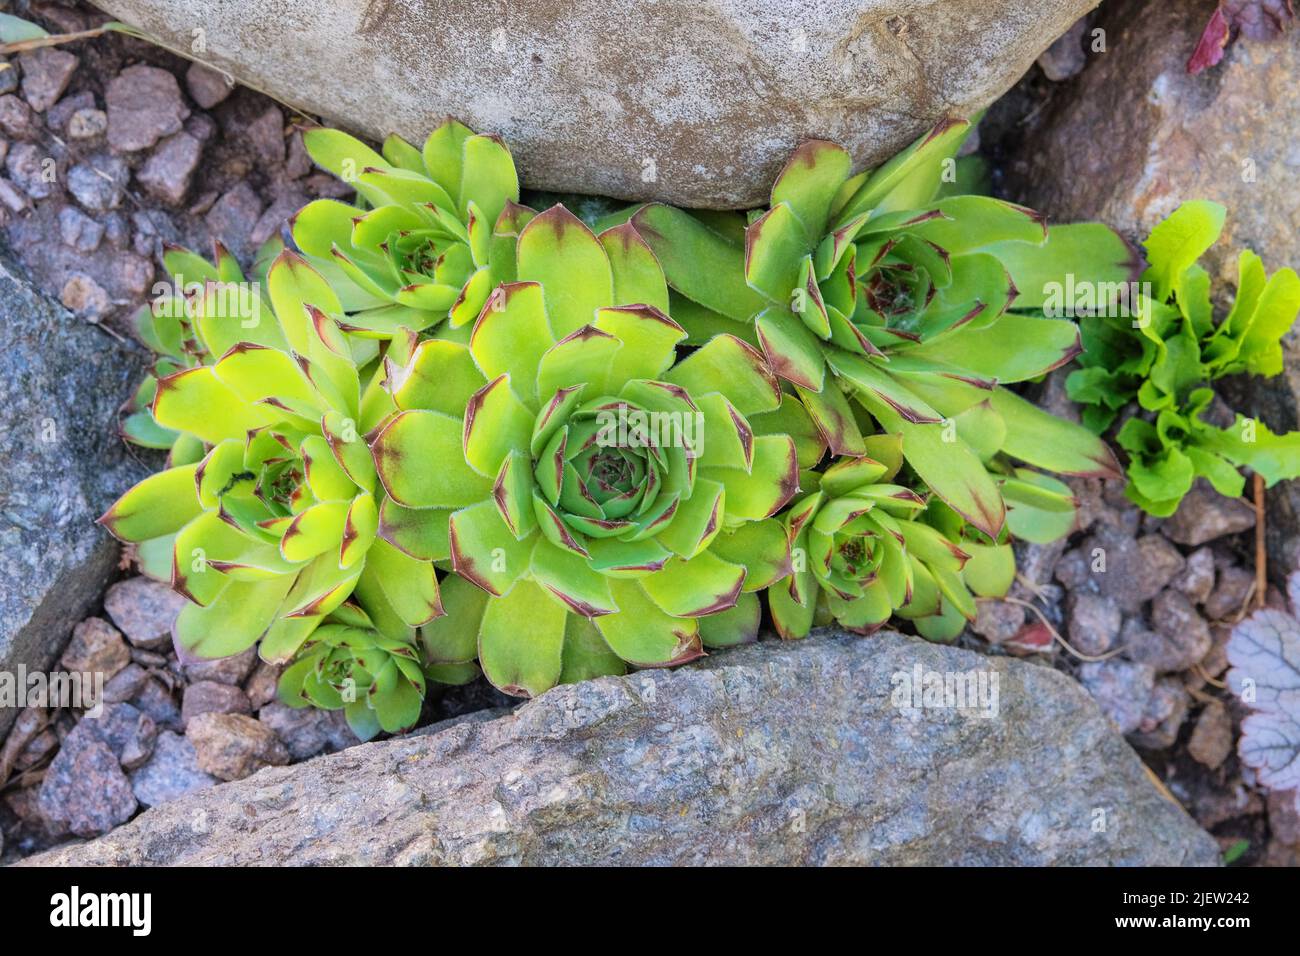 Succulent plant for landscape design in courtyard. Aeonium lindleyi plants. Top view. Stock Photo